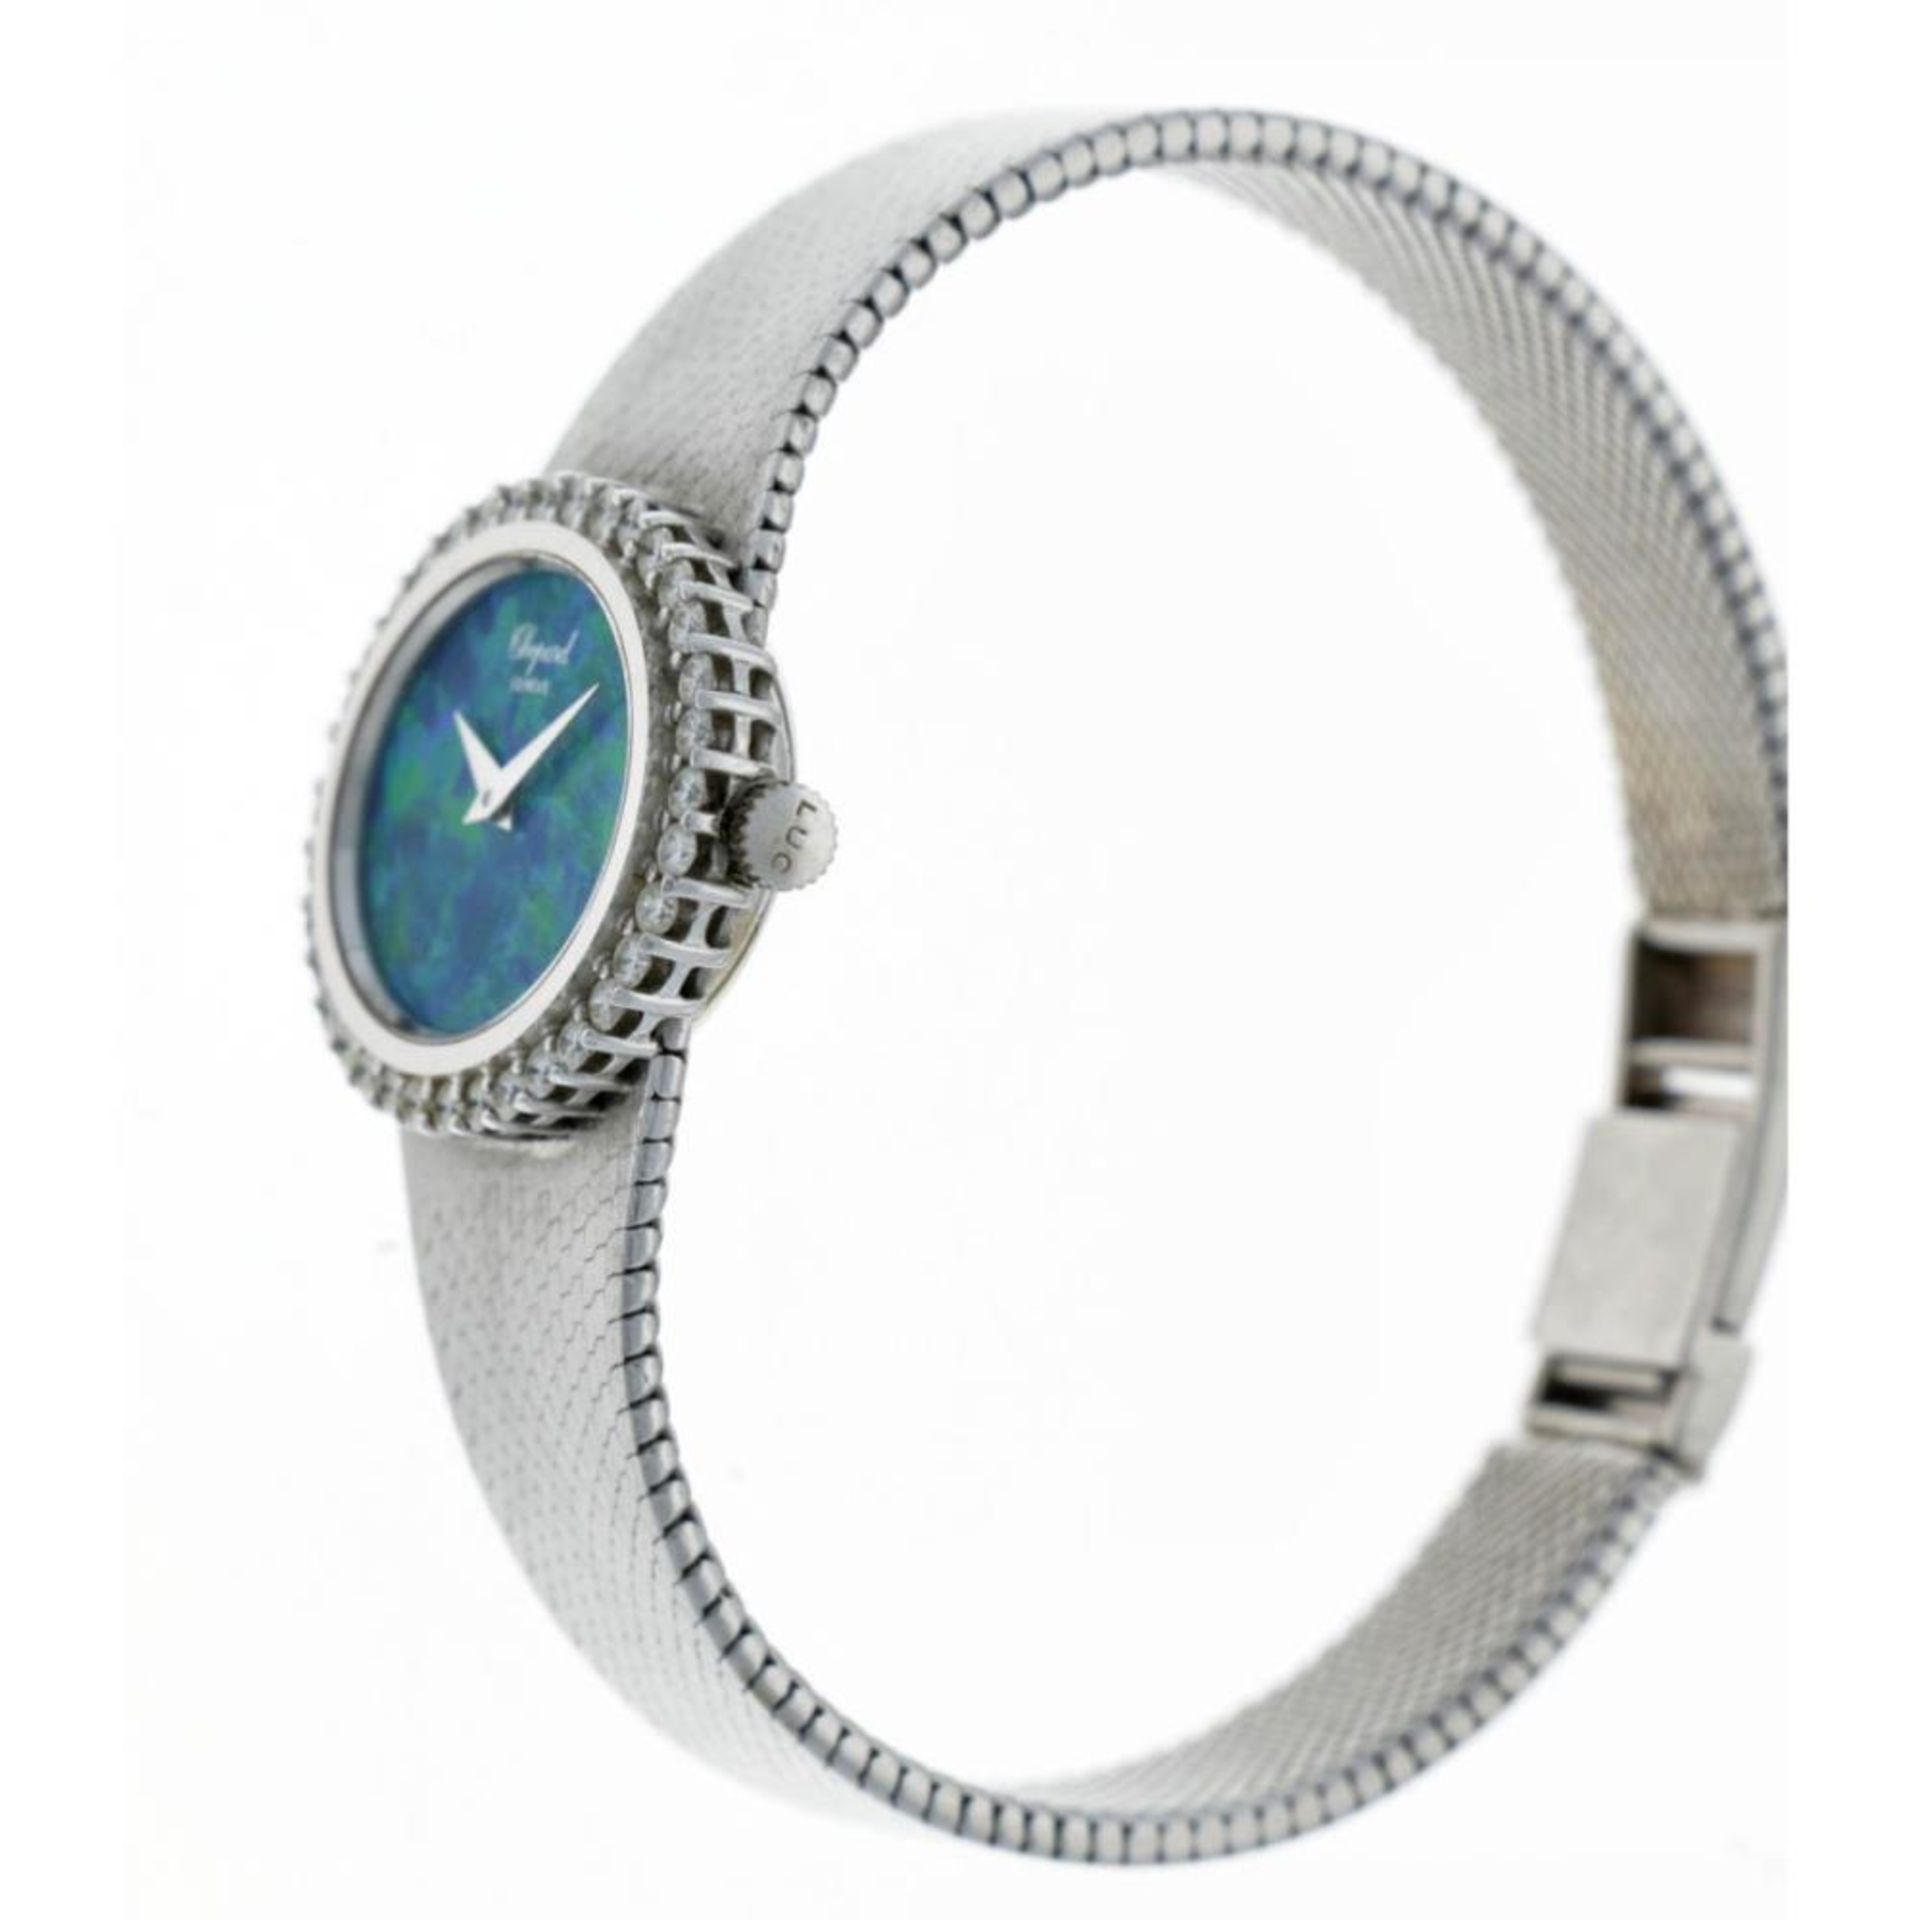 Chopard 5036 1 - Opal dial Diamonds - Ladies watch - approx. 1975. - Image 10 of 12